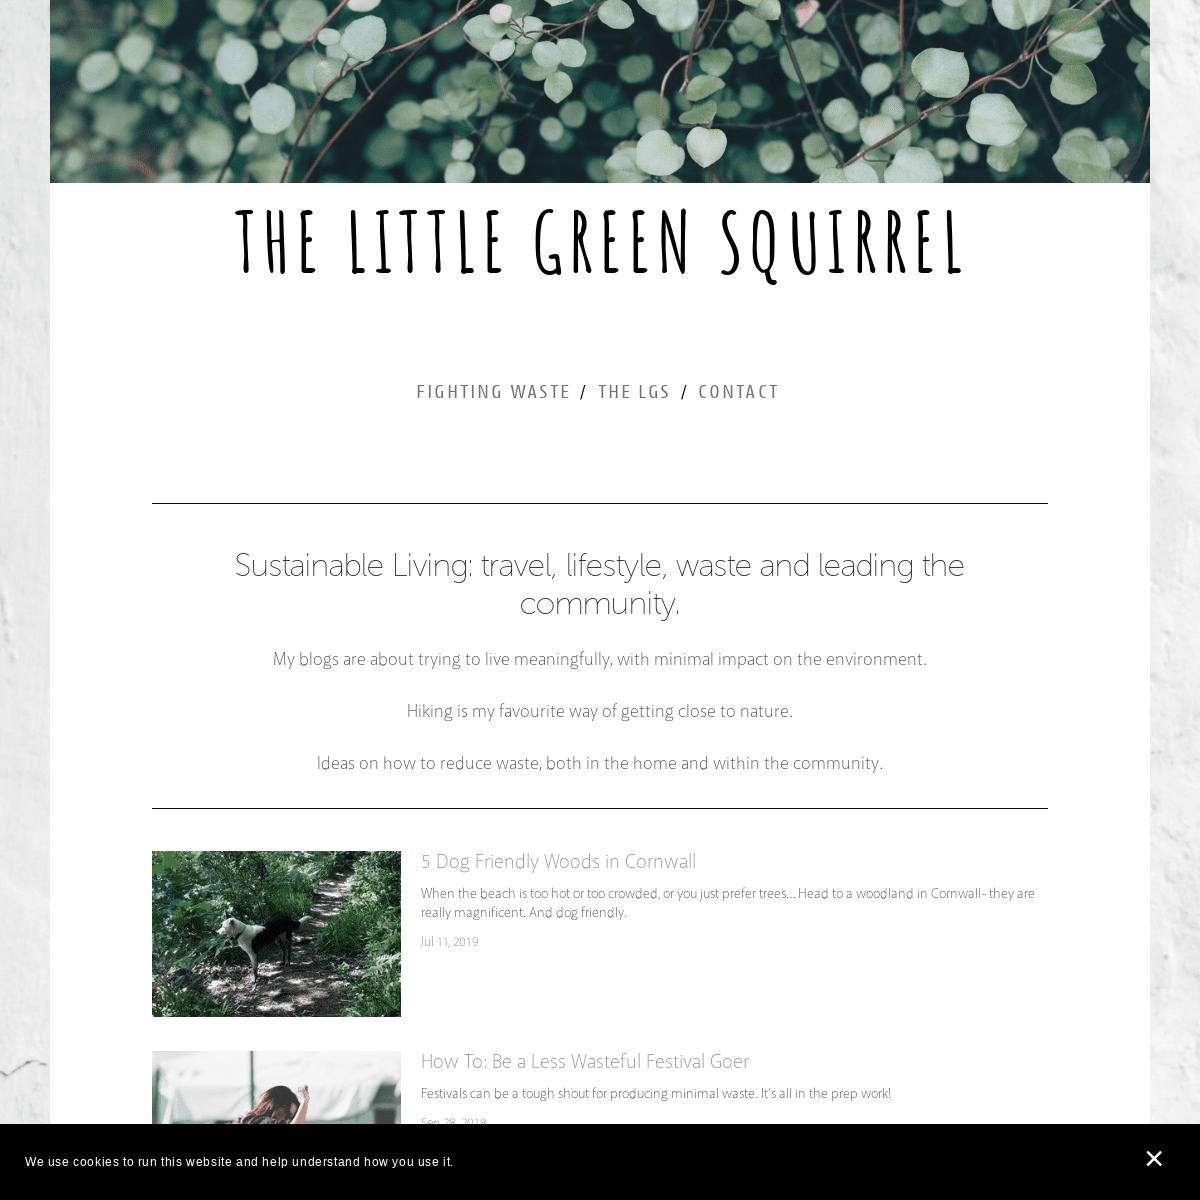 The Little Green Squirrel